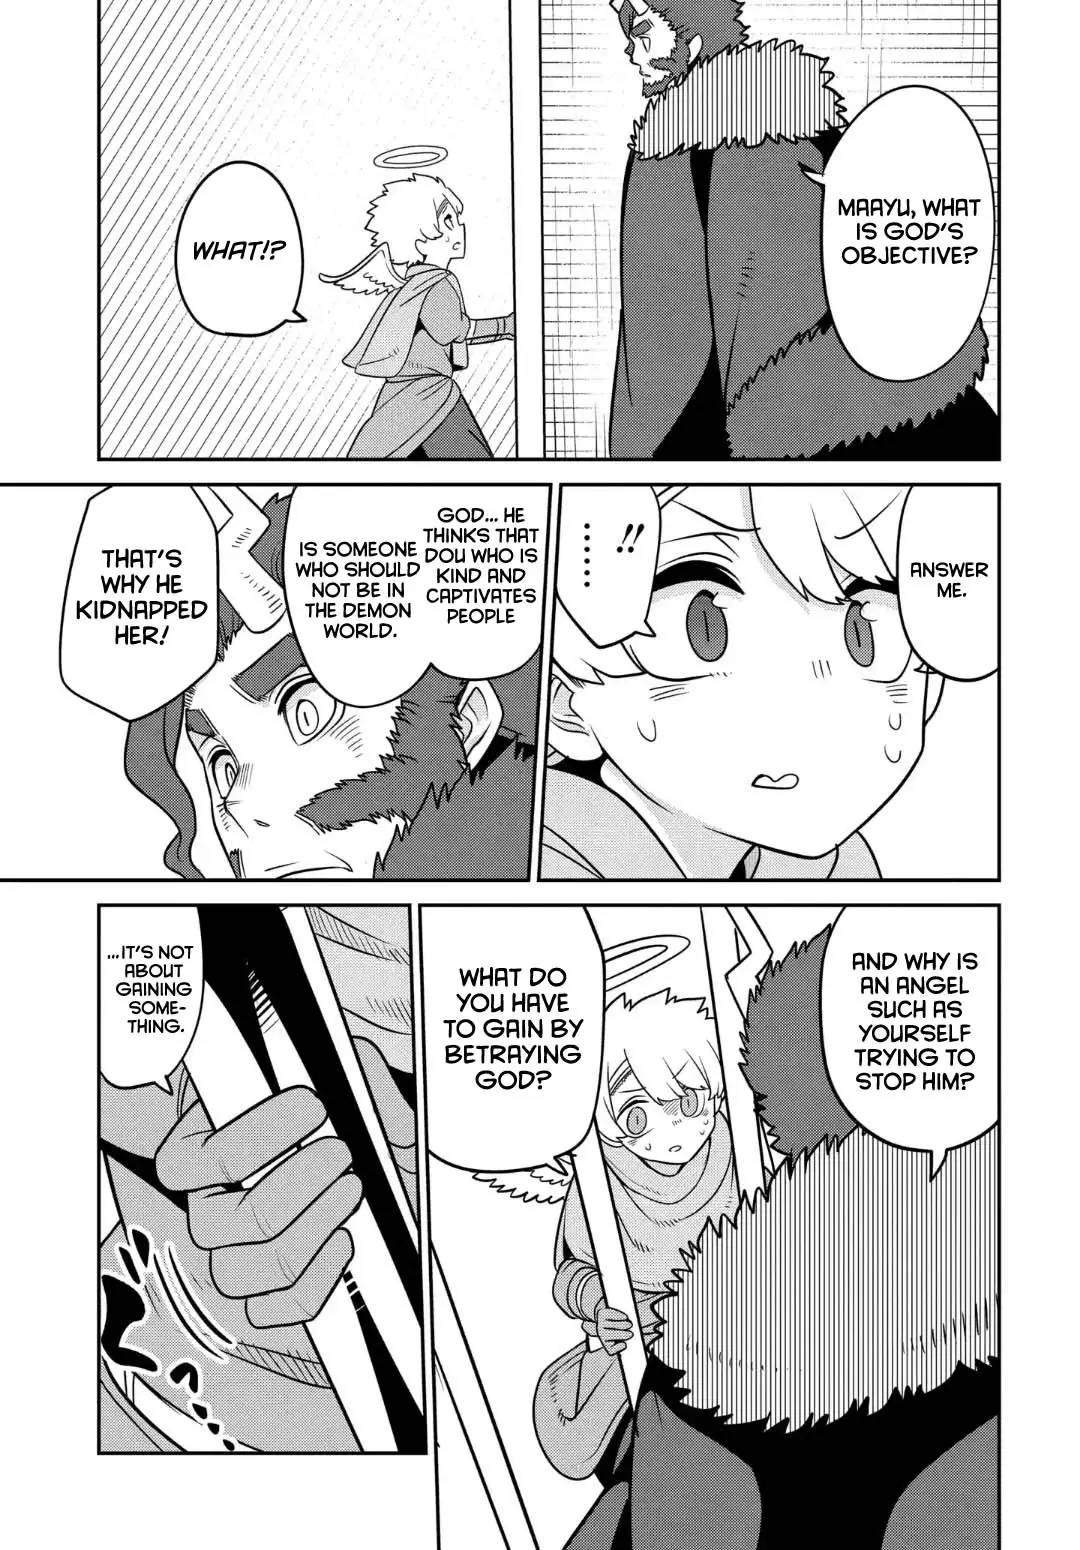 The Demon King’S Daughter Is Too Kind - 29 page 14-6370fb8a